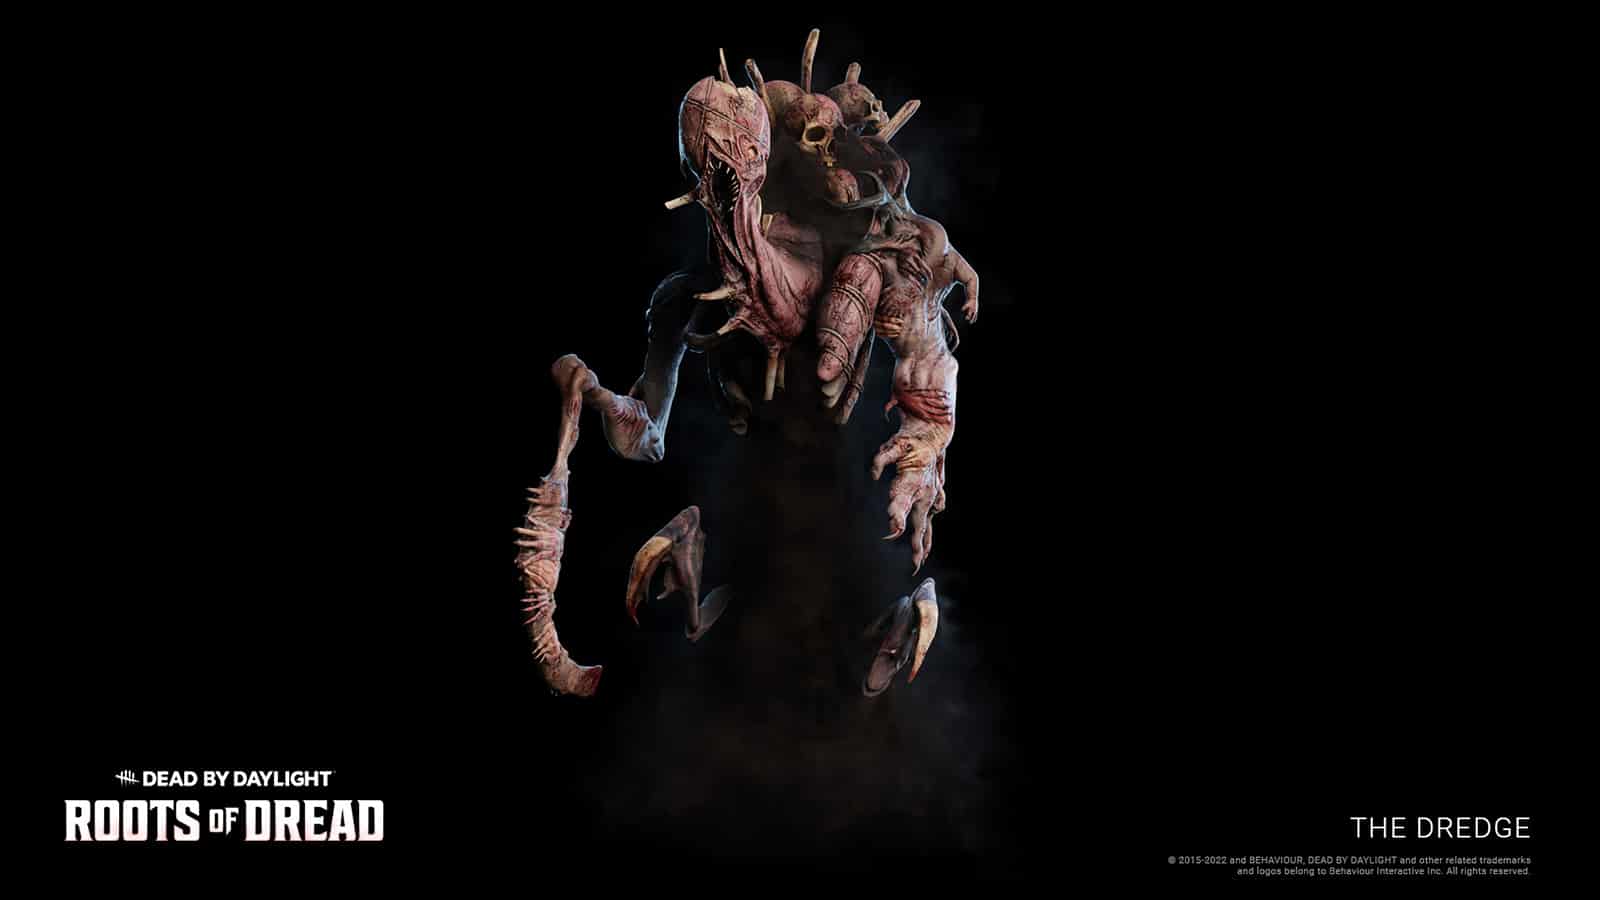 The Dredge, a new Killer in Dead by Daylight